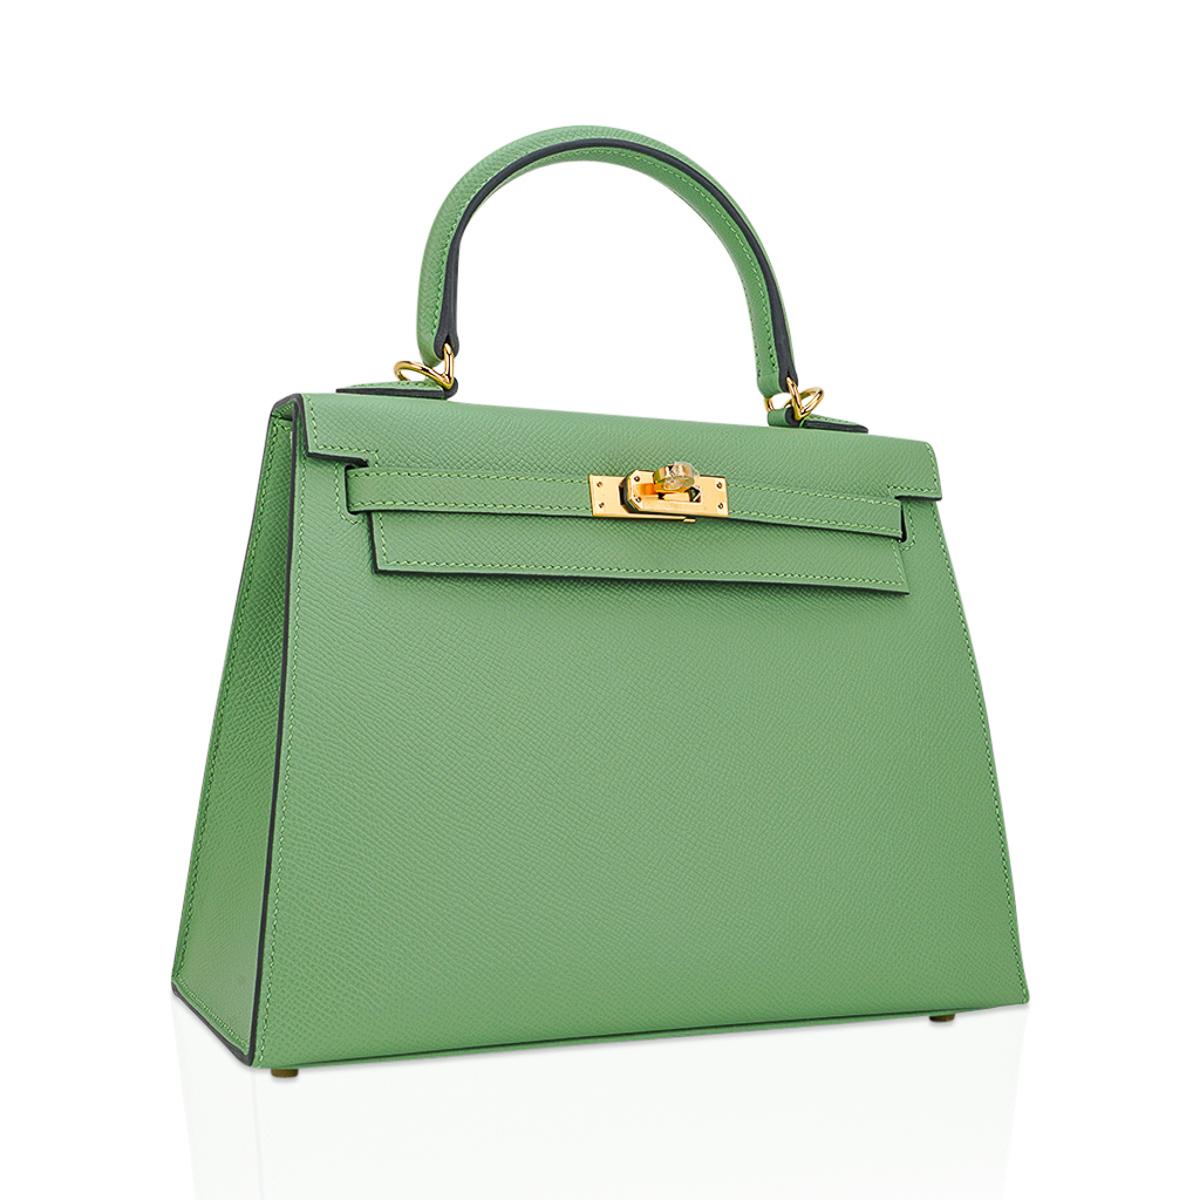 Mightychic offers an Hermes Kelly Sellier 25 bag featured in fresh Vert Criquet. 
Stunning Hermes light green that is absolutely neutral. 
Epsom leather accentuates colours beautifully as it saturates to perfection.
Luxurious with gold hardware.